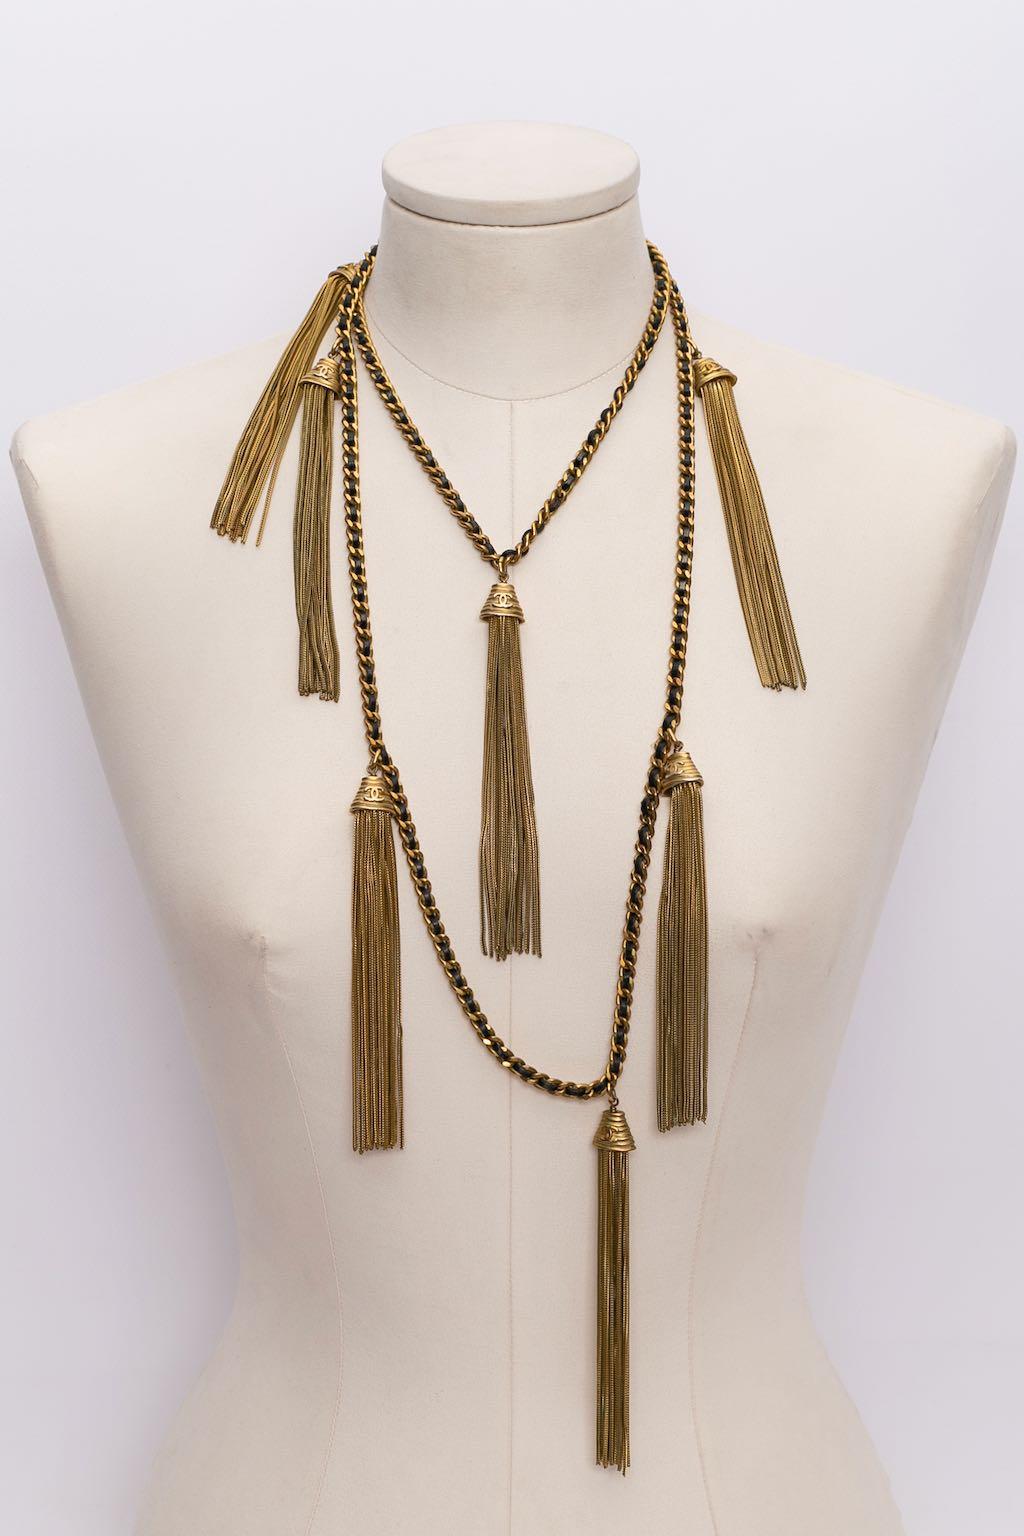 Chanel - (Made in France) Long necklace made of a gilted metal chain entwined with black leather, and adorned with tassels. Fall-Winter 1994 collection.

Additional information:
Condition: Very good condition
Dimensions: Length: 122 cm (48.03